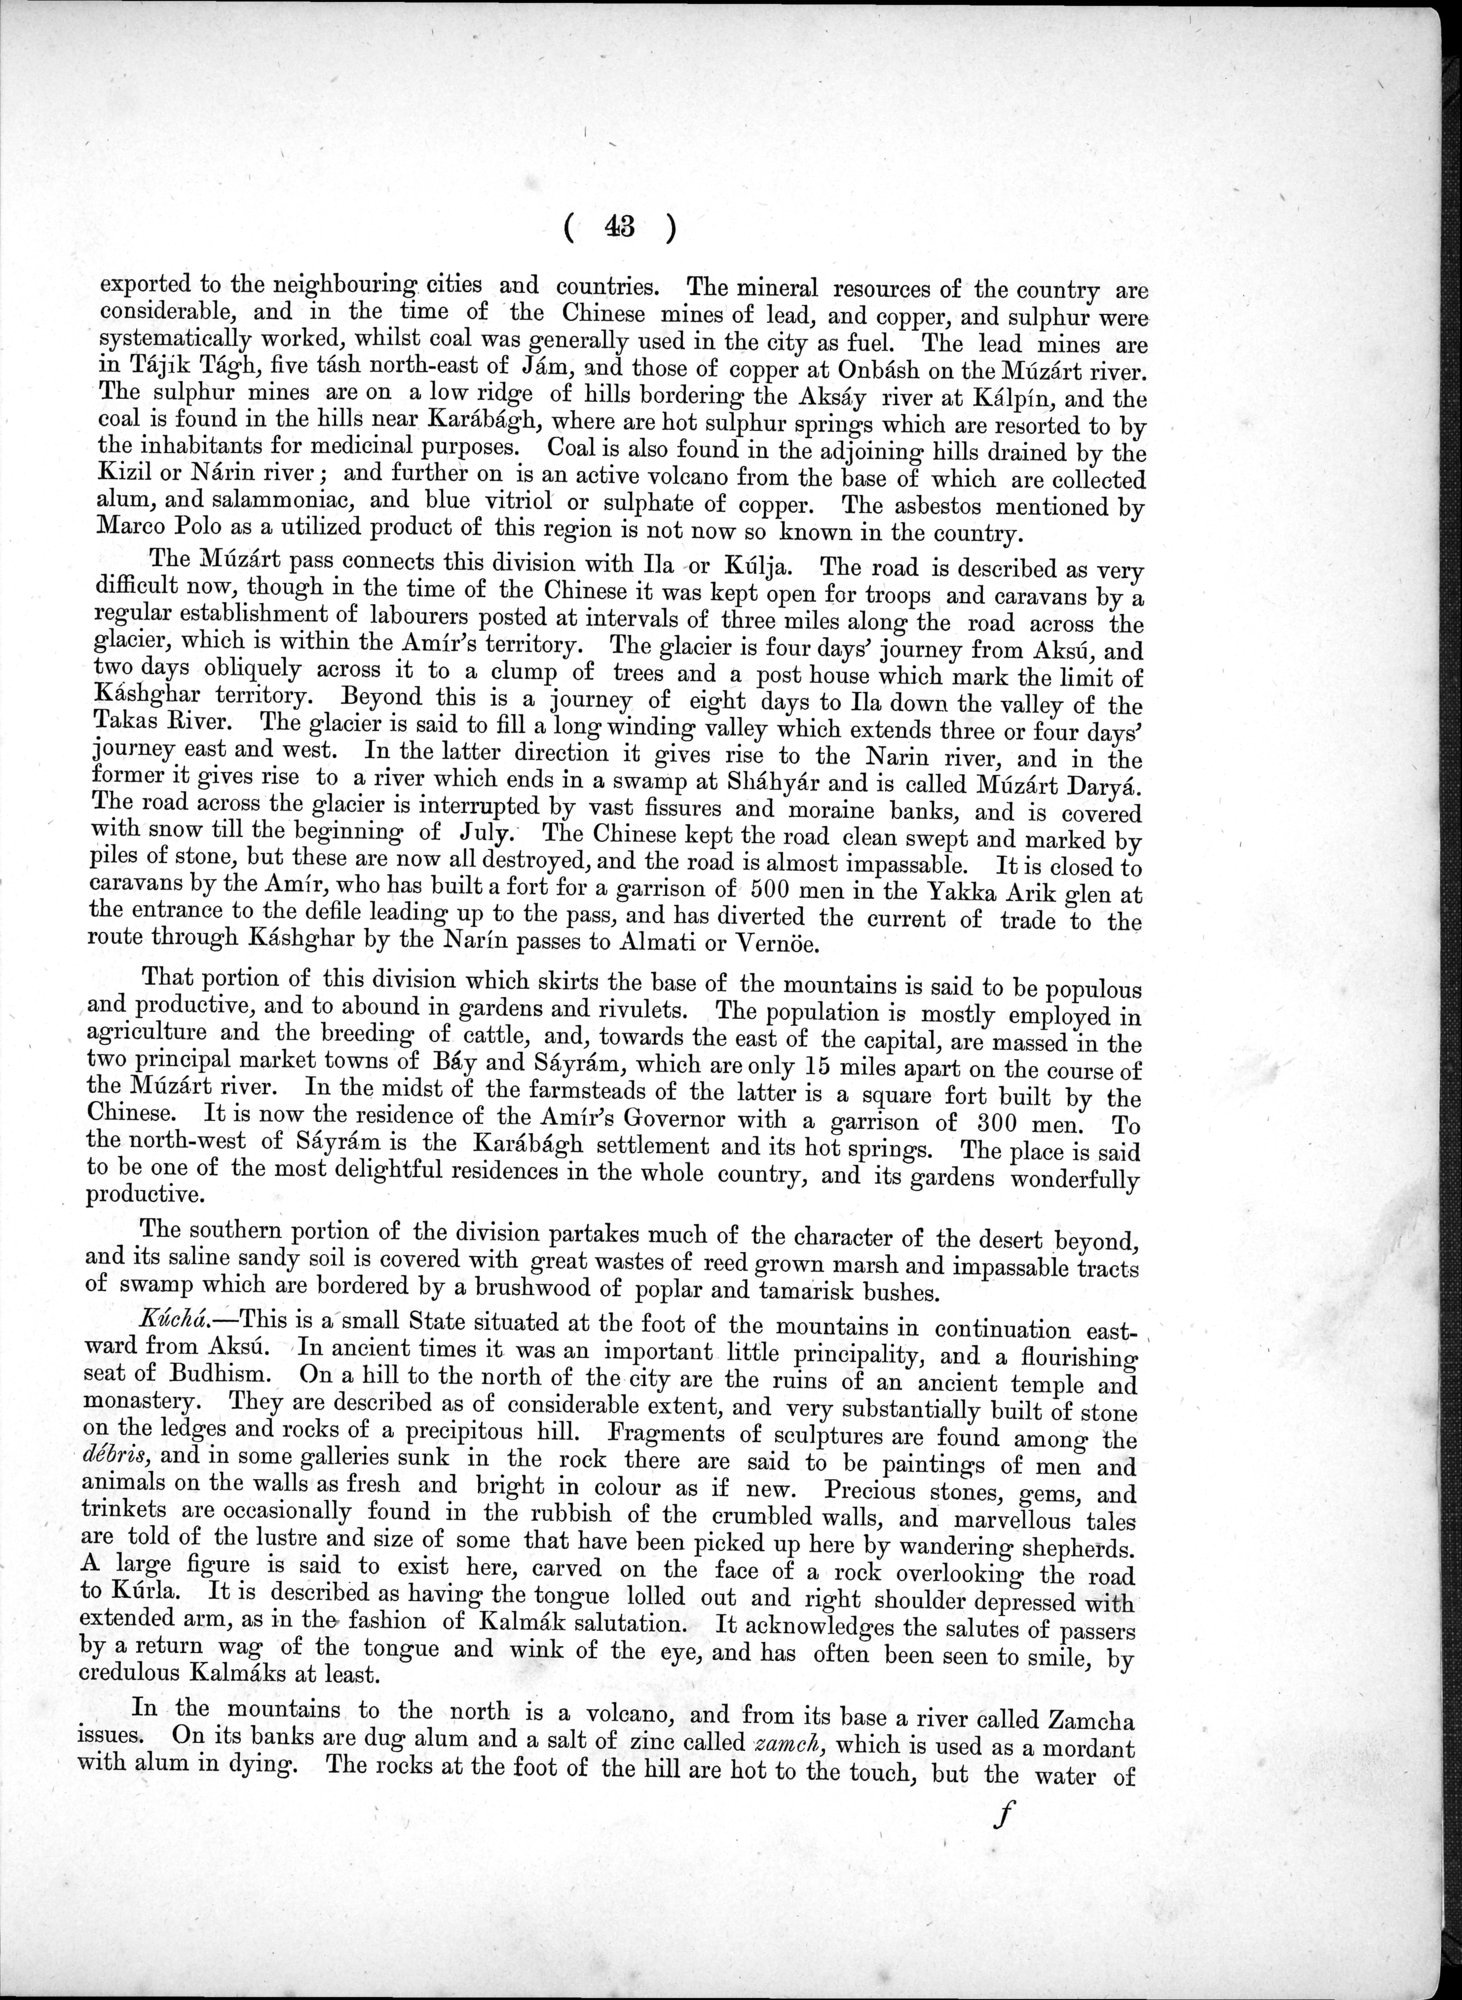 Report of a Mission to Yarkund in 1873 : vol.1 / Page 79 (Grayscale High Resolution Image)